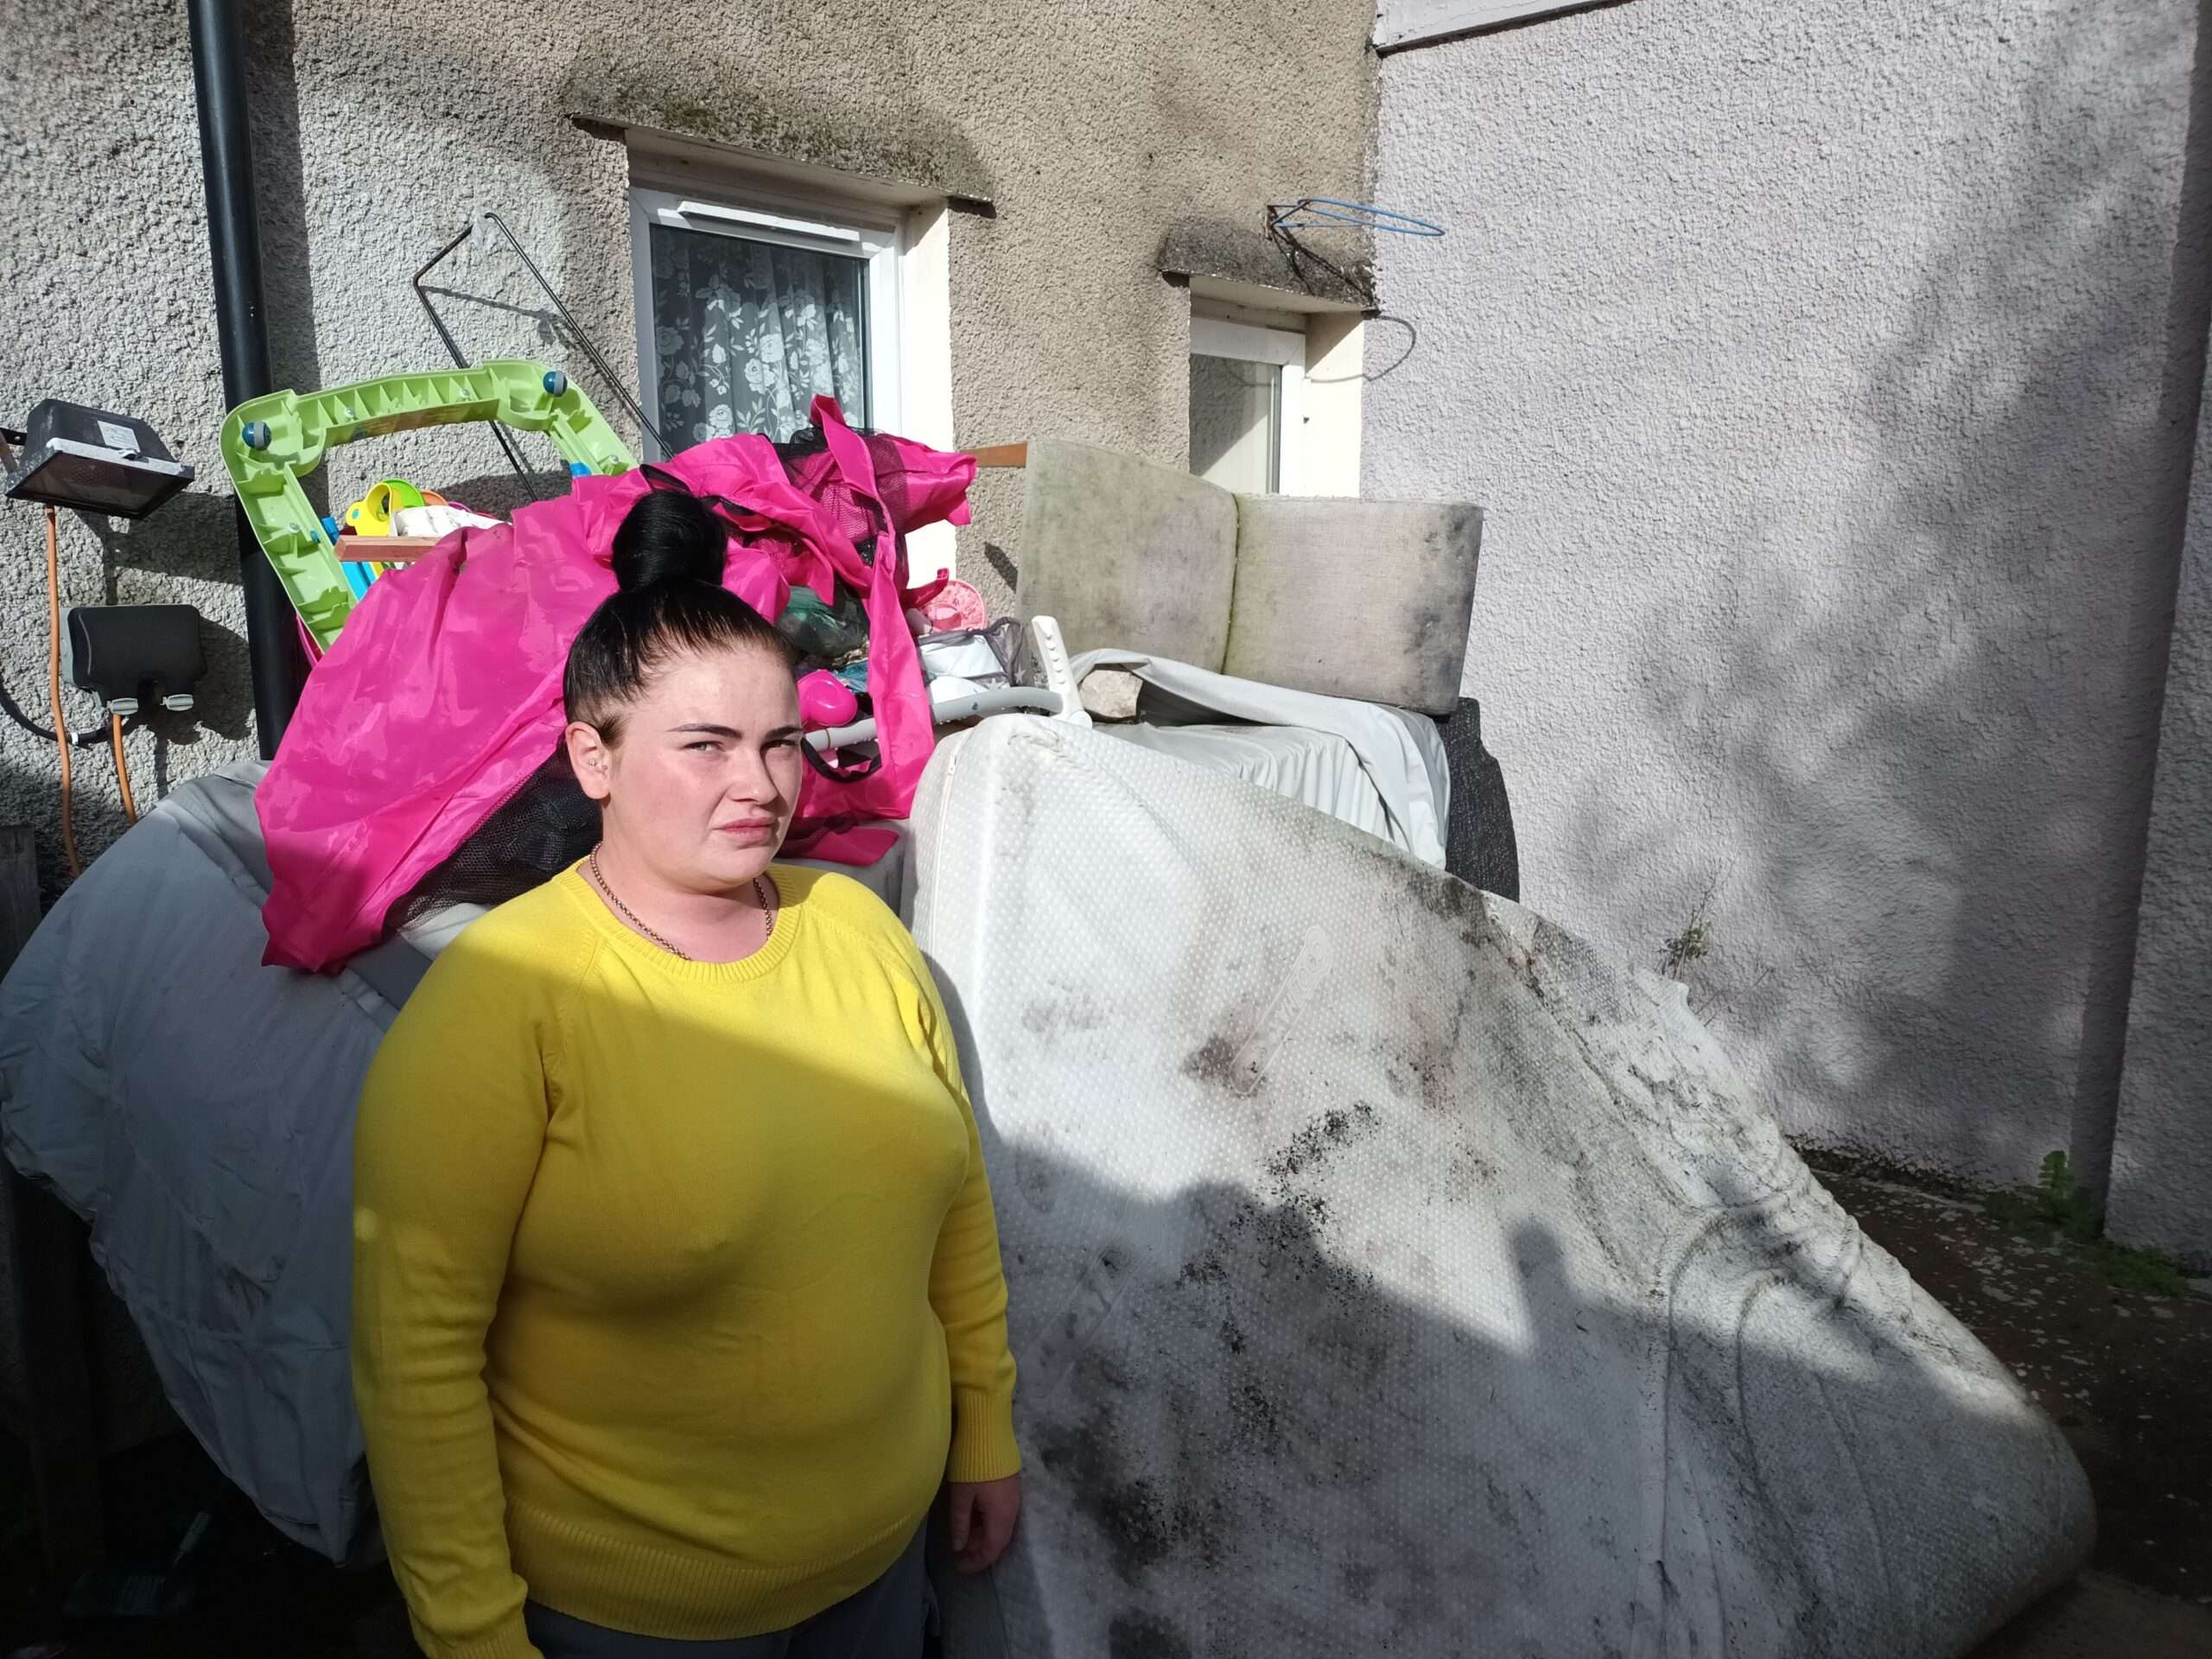 Cardiff family living in ‘dangerous’ temporary accommodation